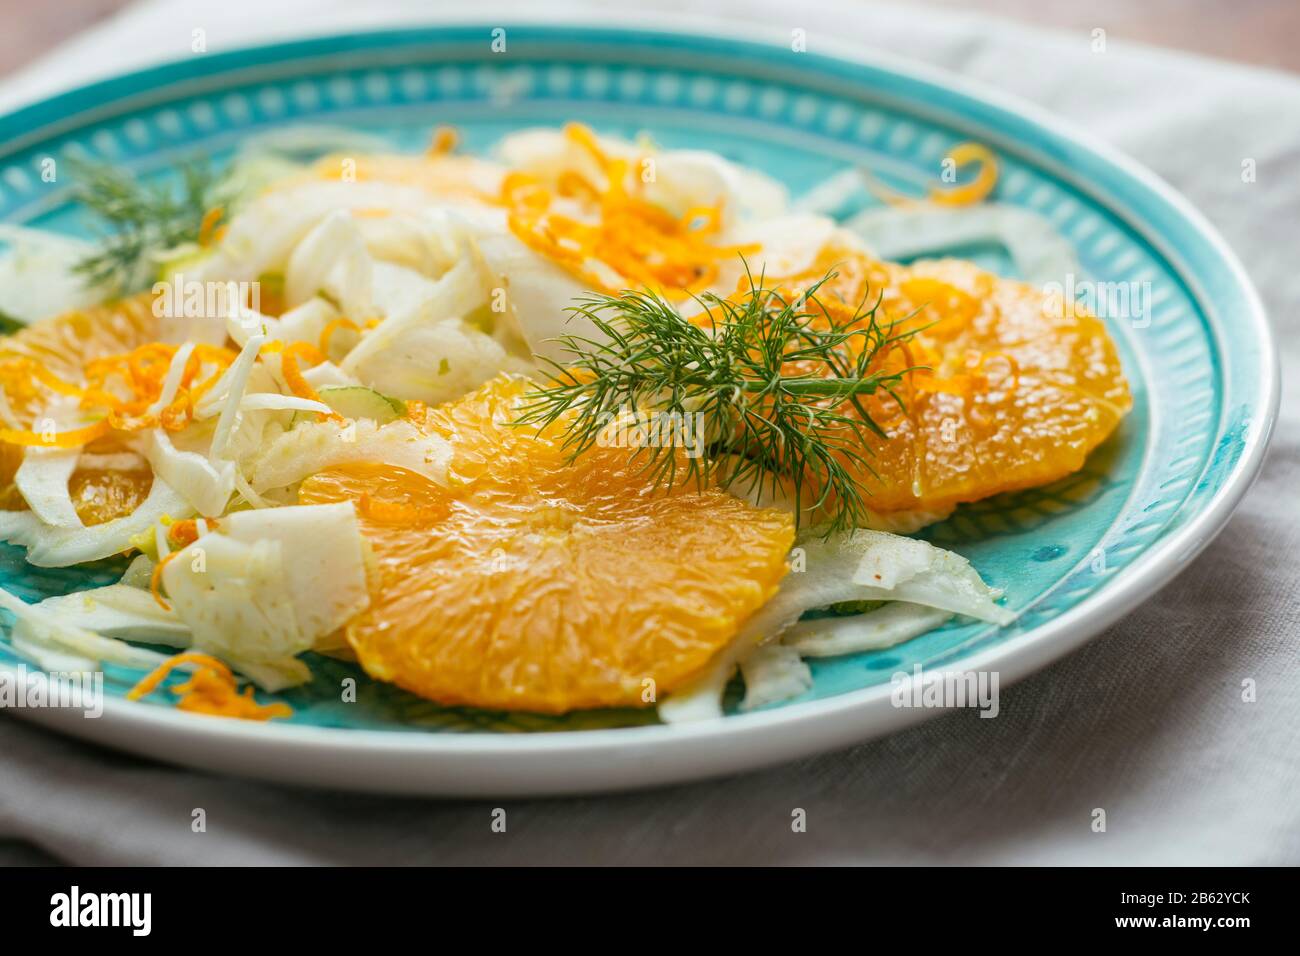 Plate with a healthy fennel and orange salad. Stock Photo